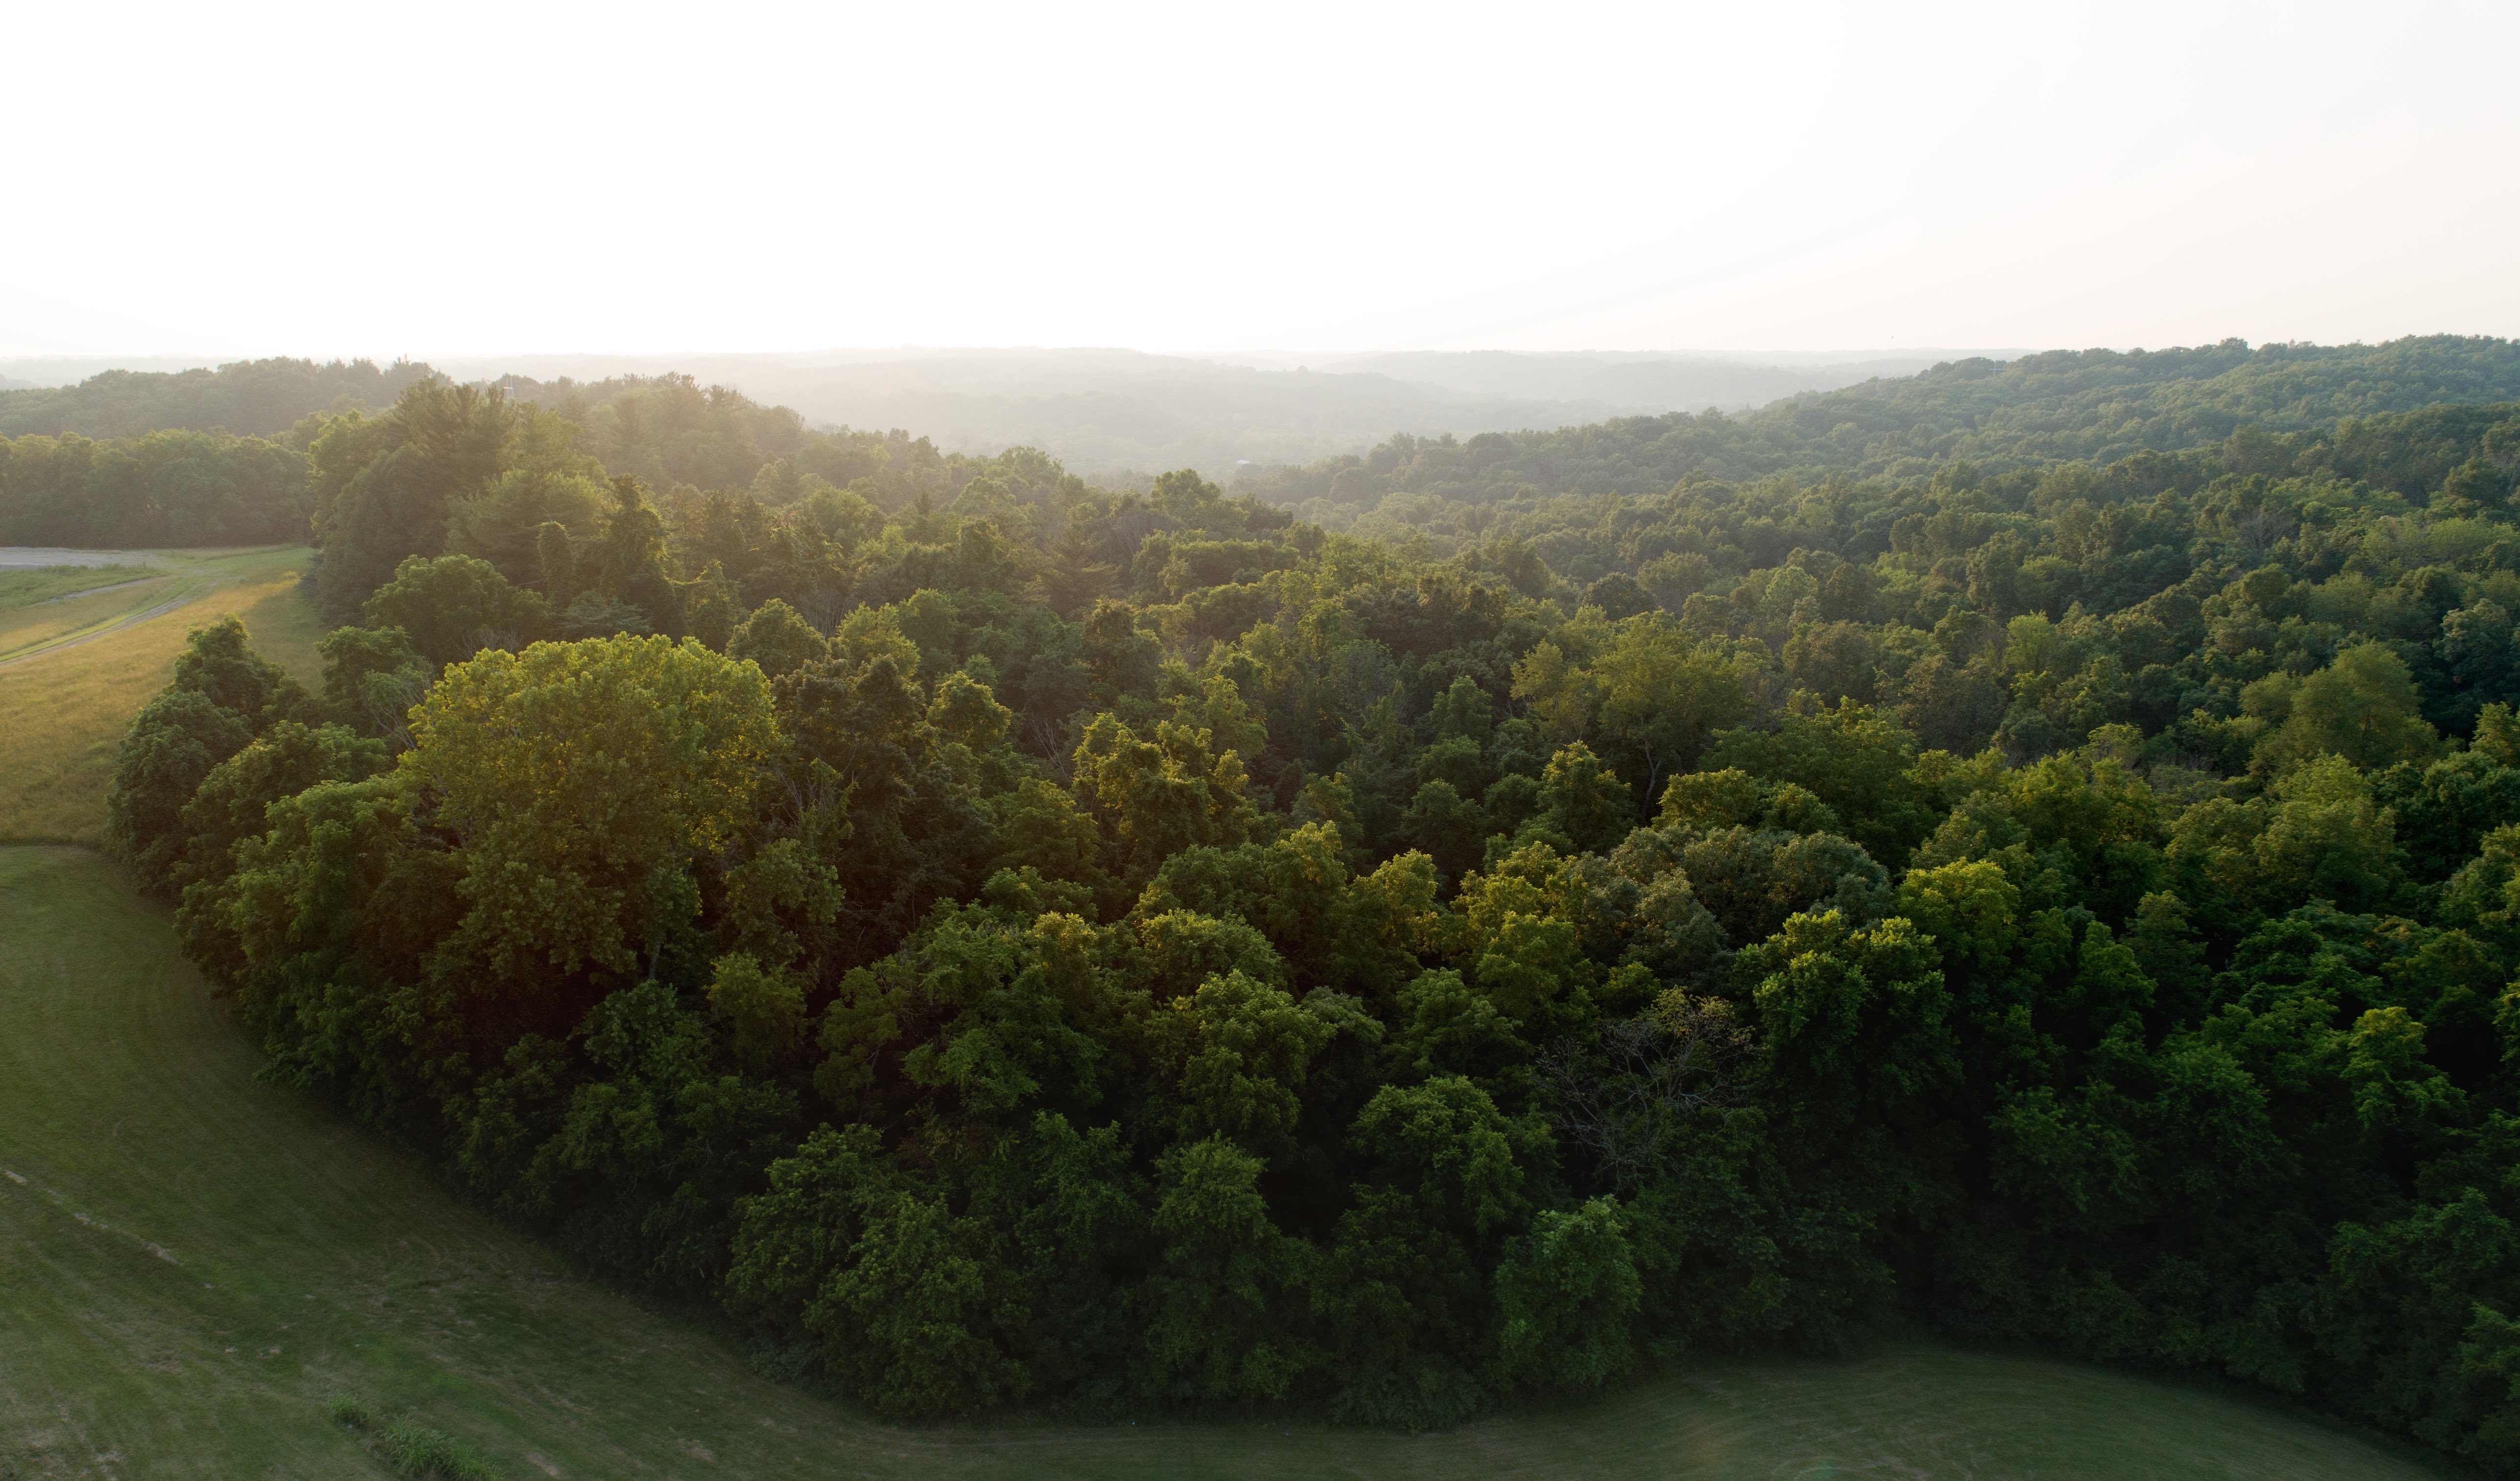 Rolling hills and trees make up a green landscape of southeast Ohio.